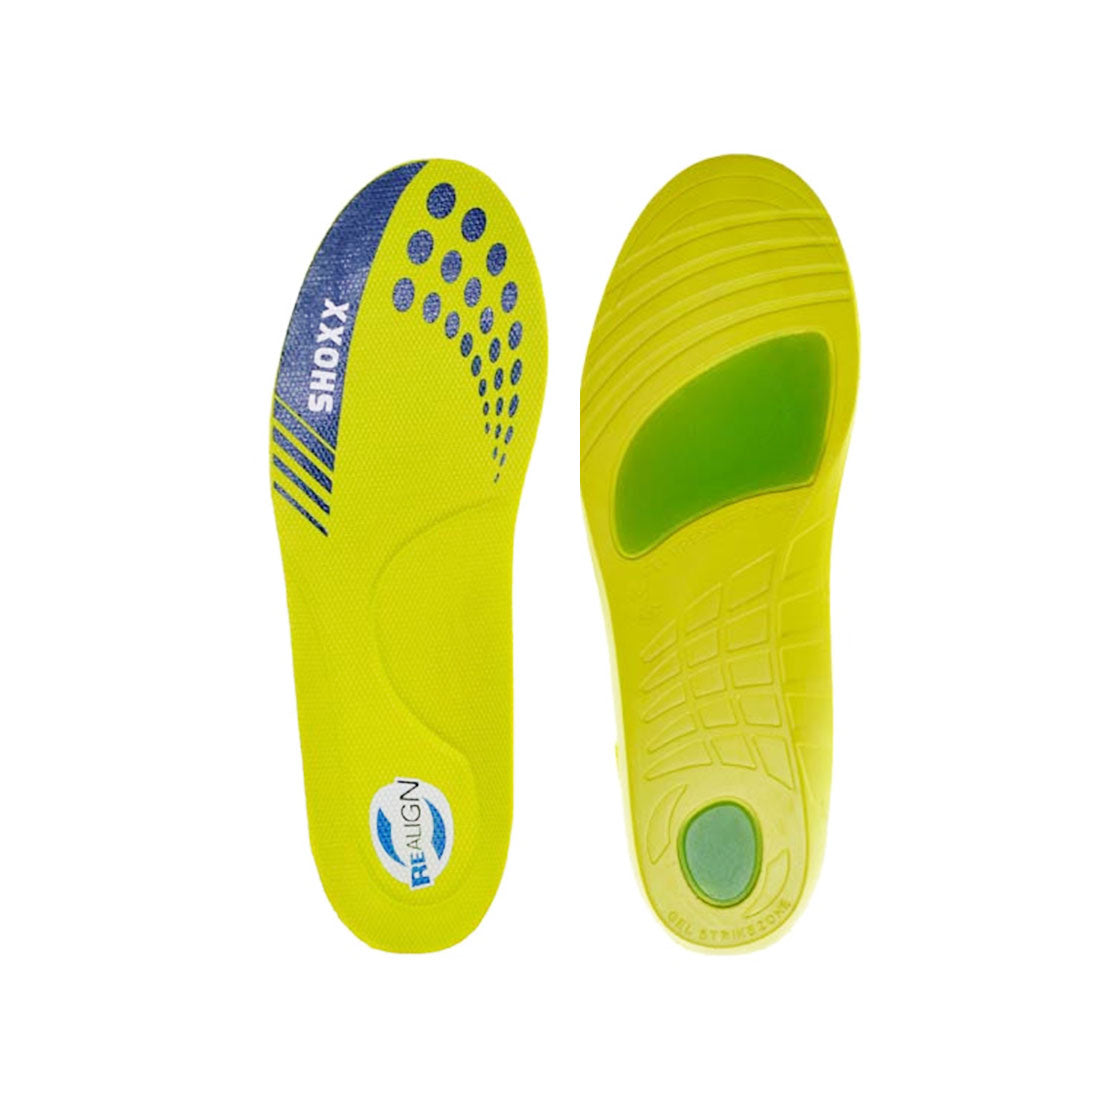 Realign Shoxx Innersole Insoles and Fitting Aids